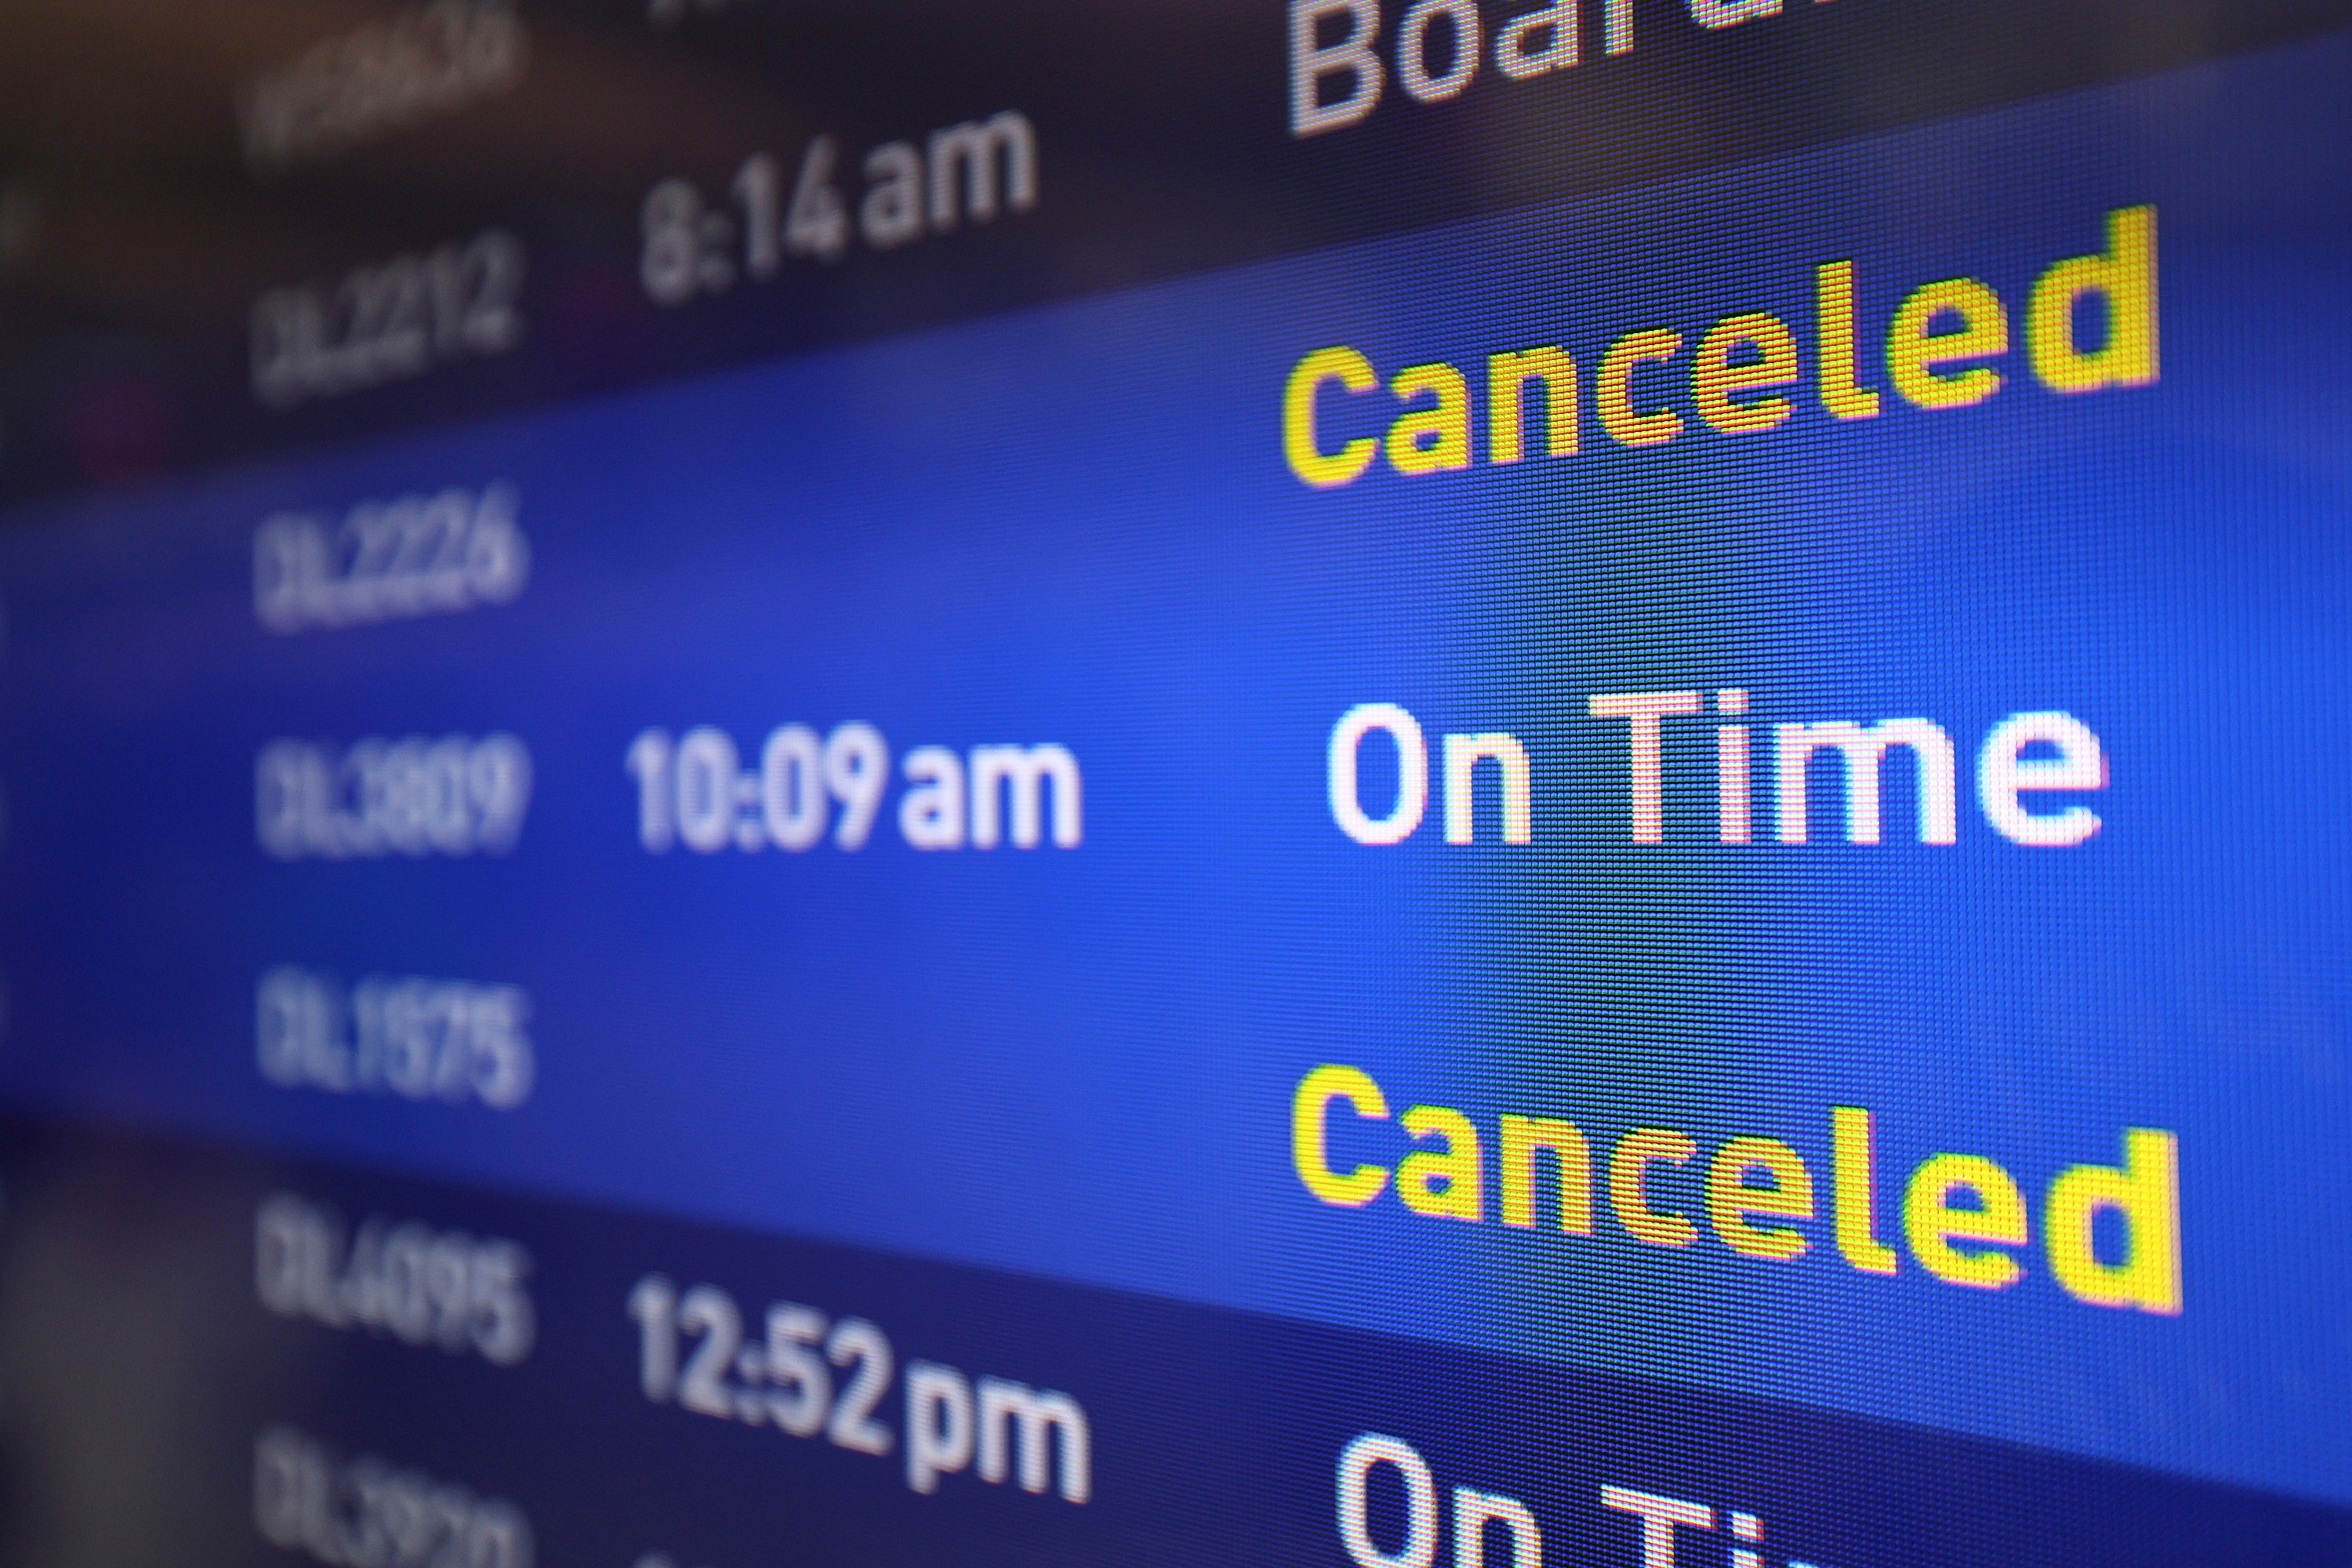 A global IT outage, storms in Europe and air-traffic control issues have led to many delays